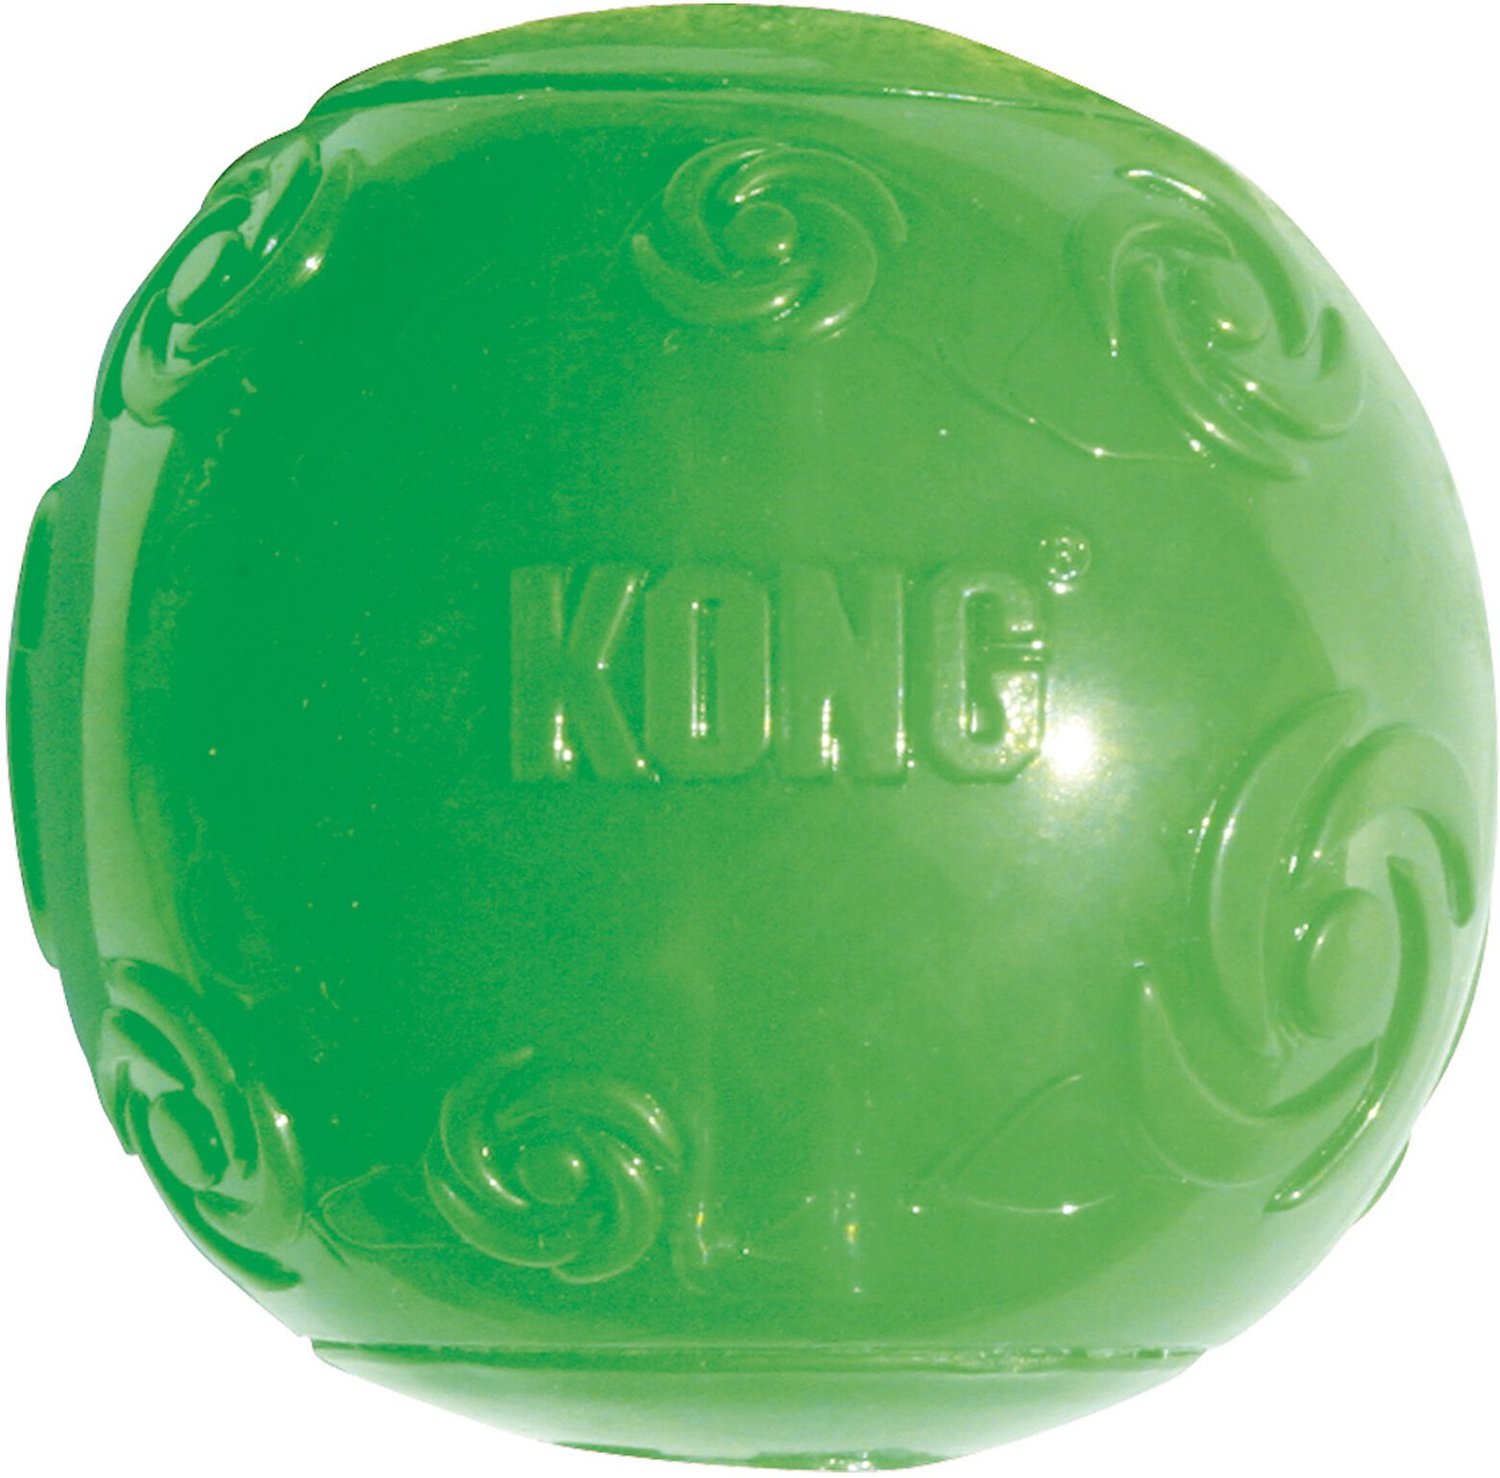 kong squeezz ball dog toy